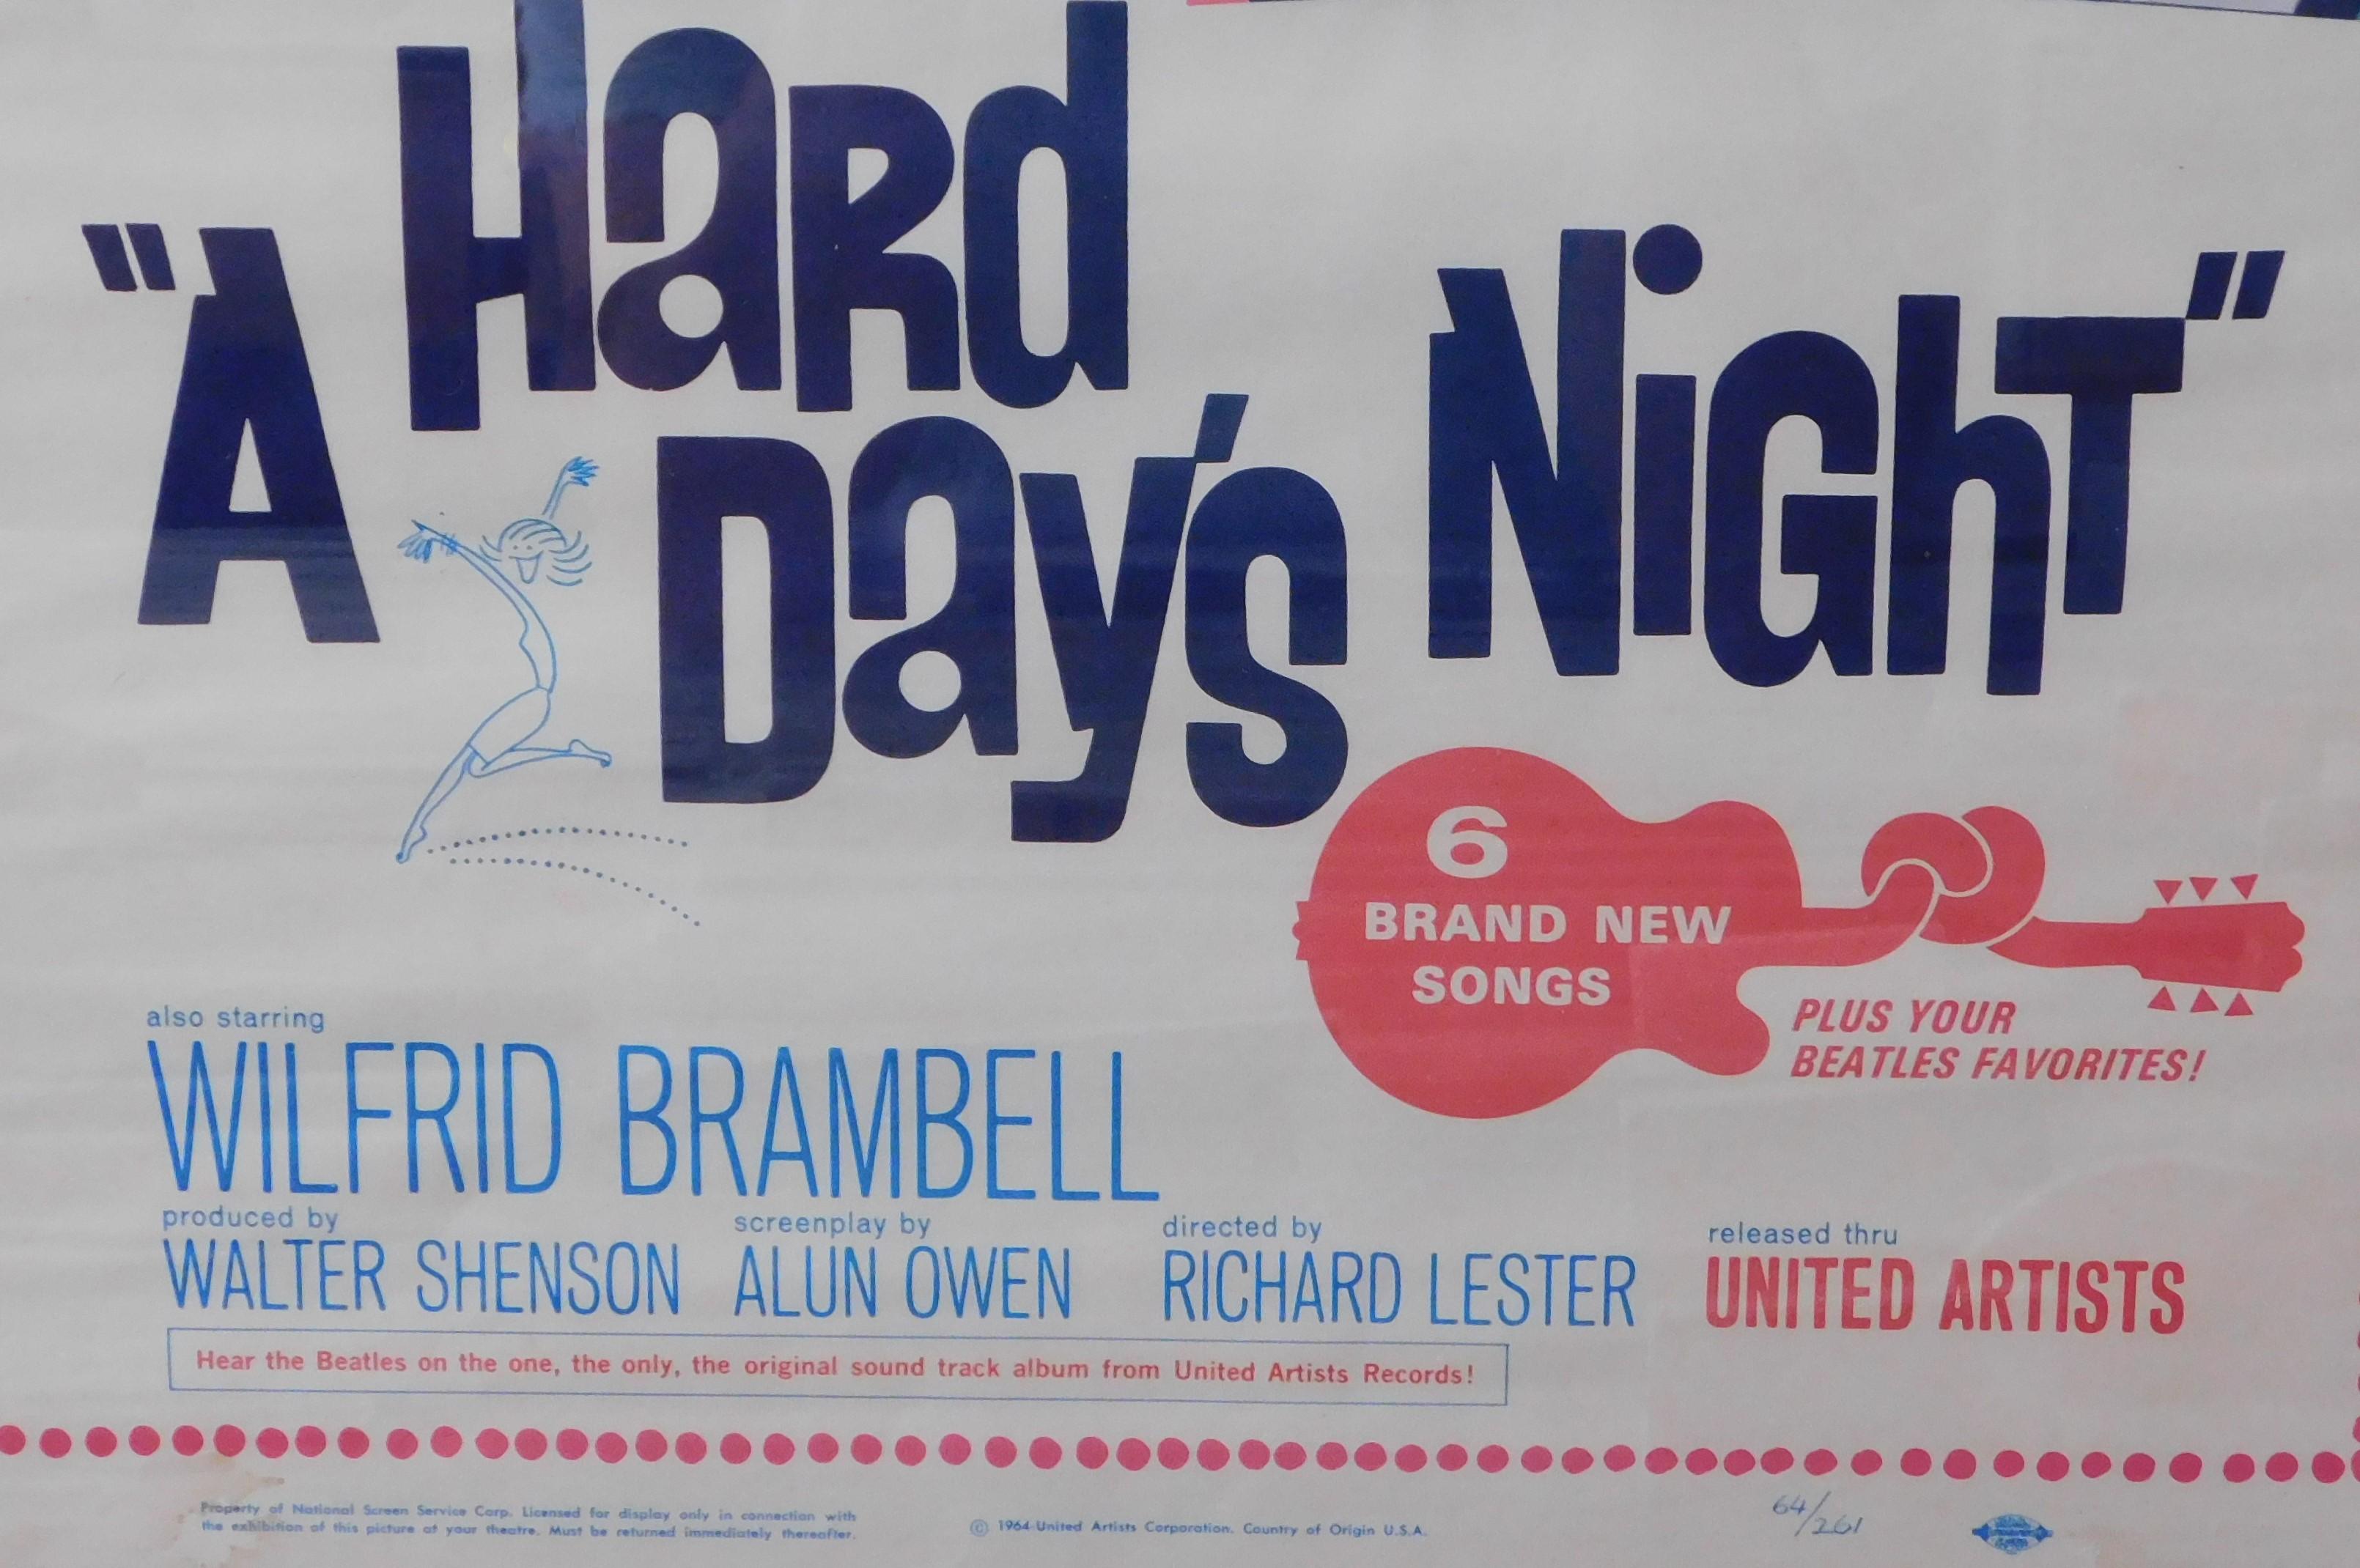 The Beatles Original a Hard Days Night Window Card In Good Condition For Sale In Hamilton, Ontario